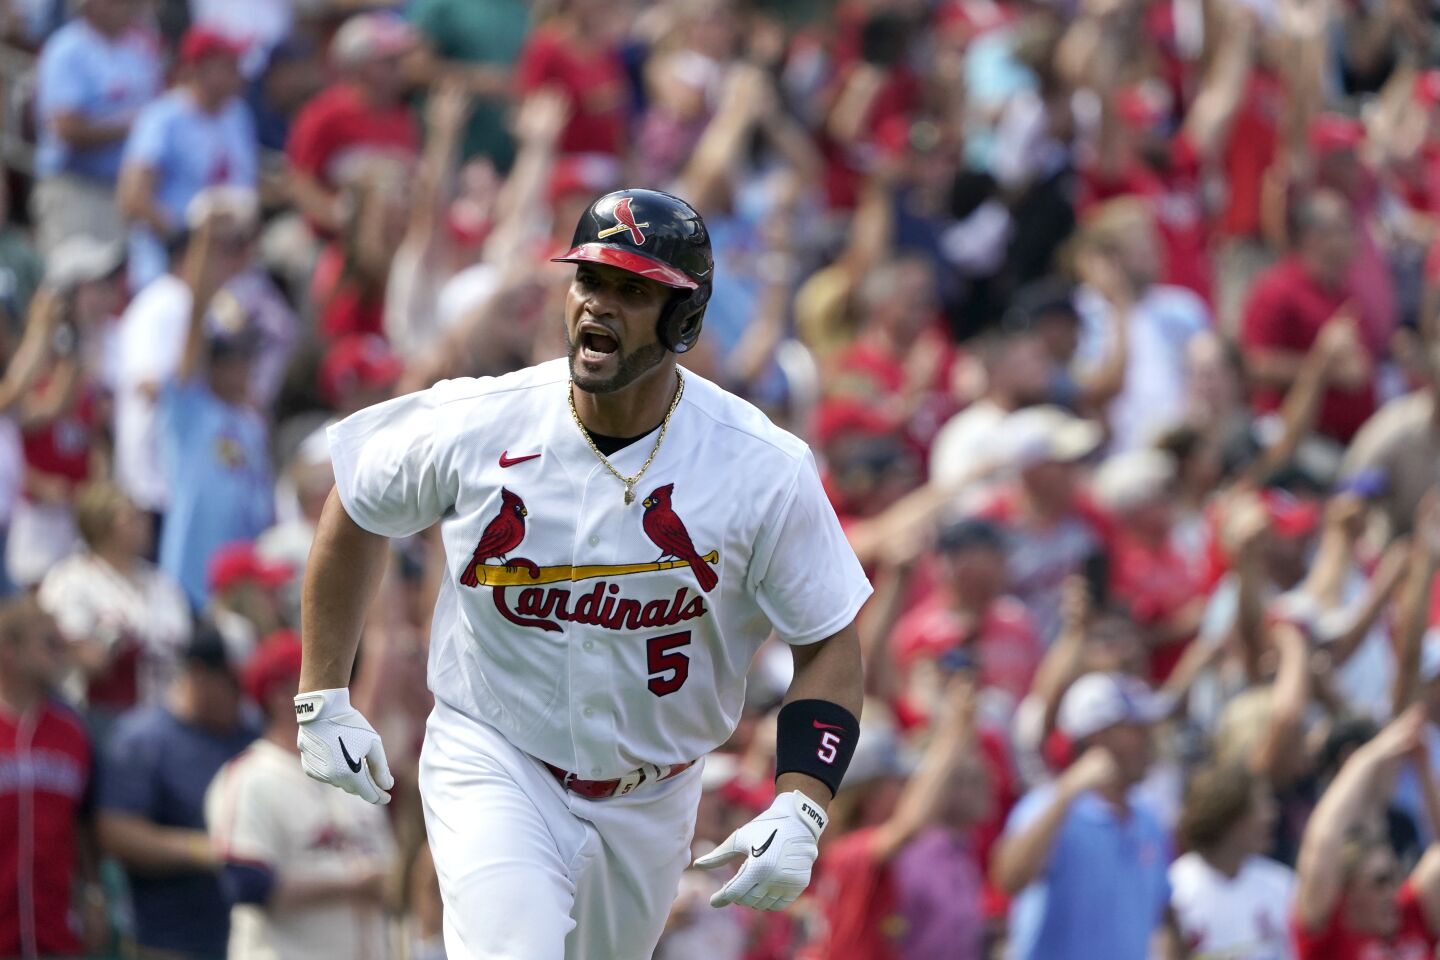 7 | St. Louis Cardinals (63-51; LW: 6)“I’m the grandpa in the clubhouse,” Albert Pujols said after two homers on Sunday pushed his total to 689, seven behind Alex Rodriguez for fifth all-time.